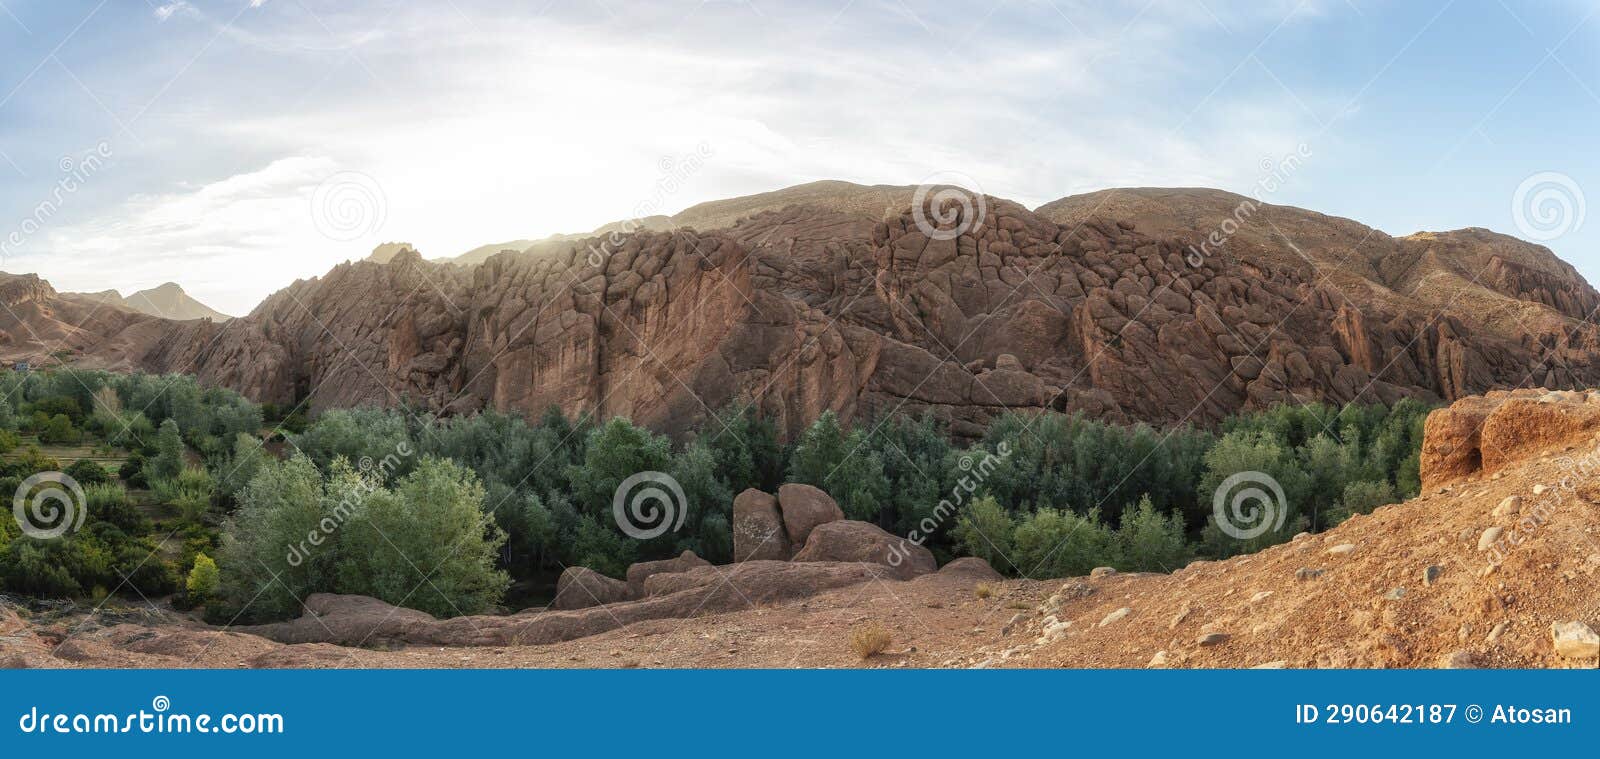 the monkey's fingers (doigts de singes), rock formations, high atlas mountains, morocco